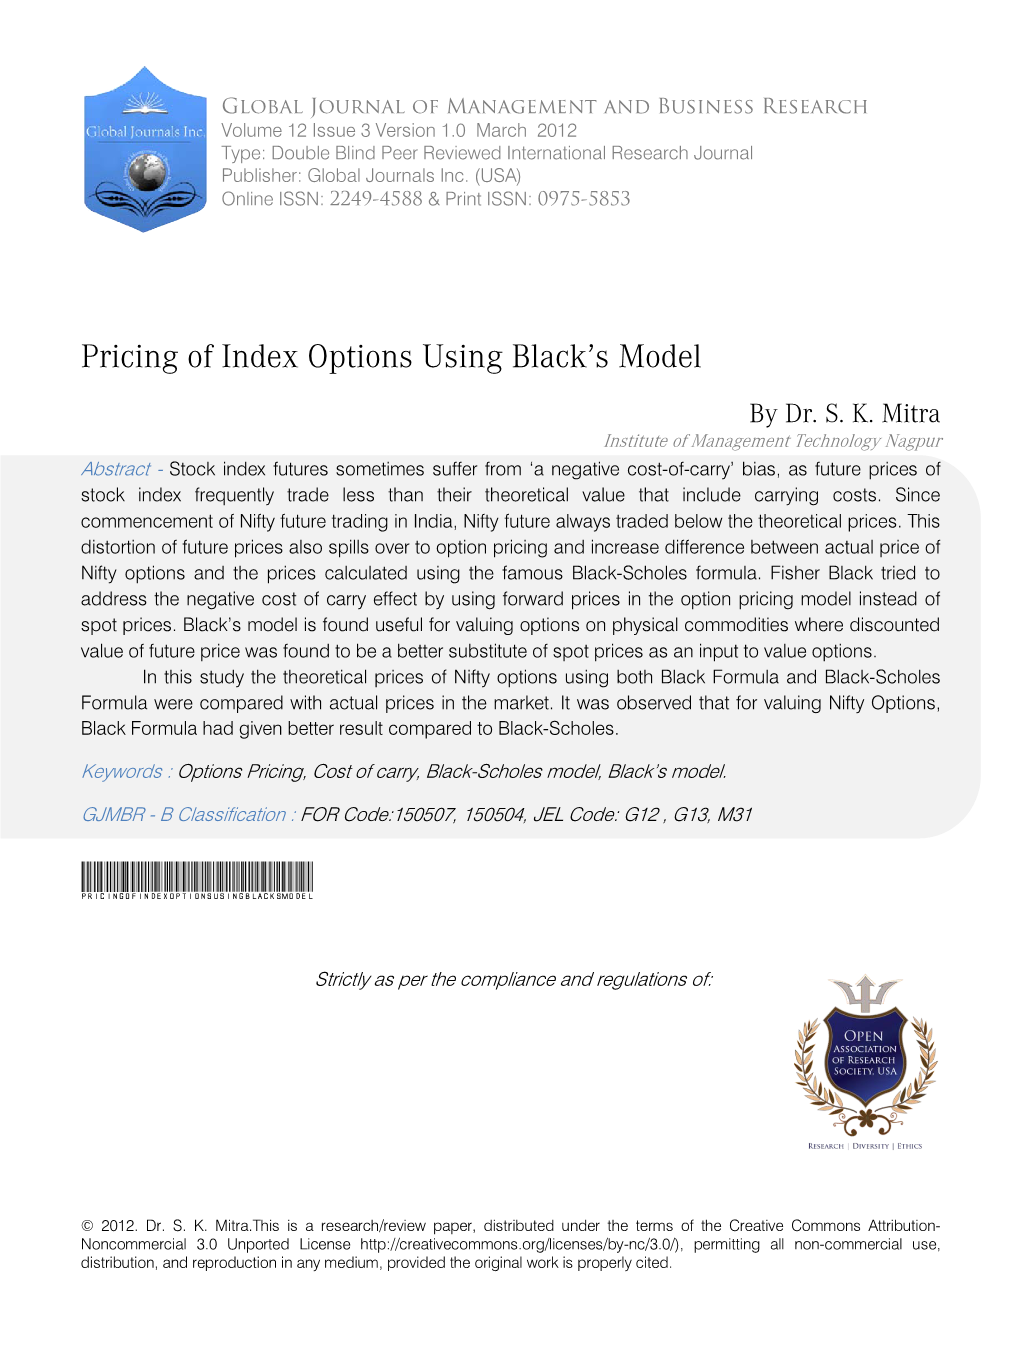 Pricing of Index Options Using Black's Model